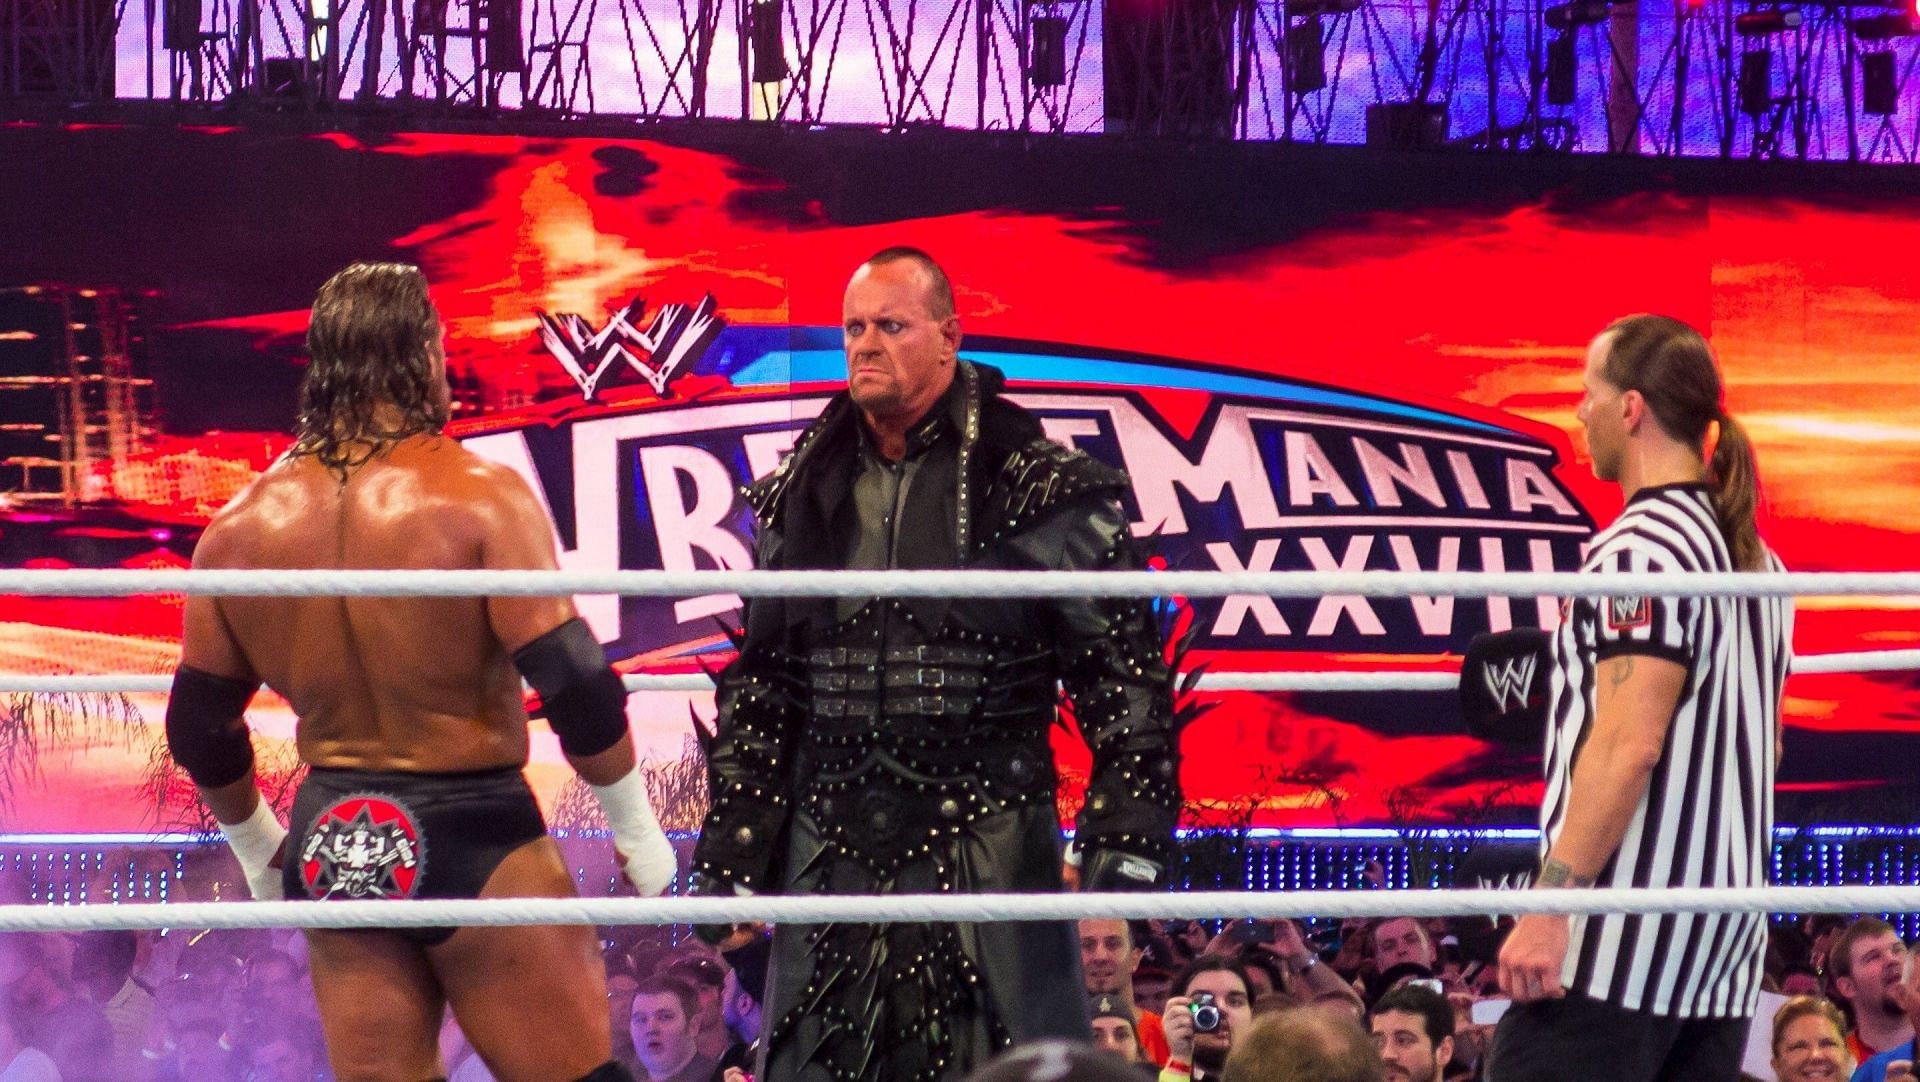 Undertaker faced Triple H at WrestleMania XXVII With Shawn Michaels as Guest Referee.